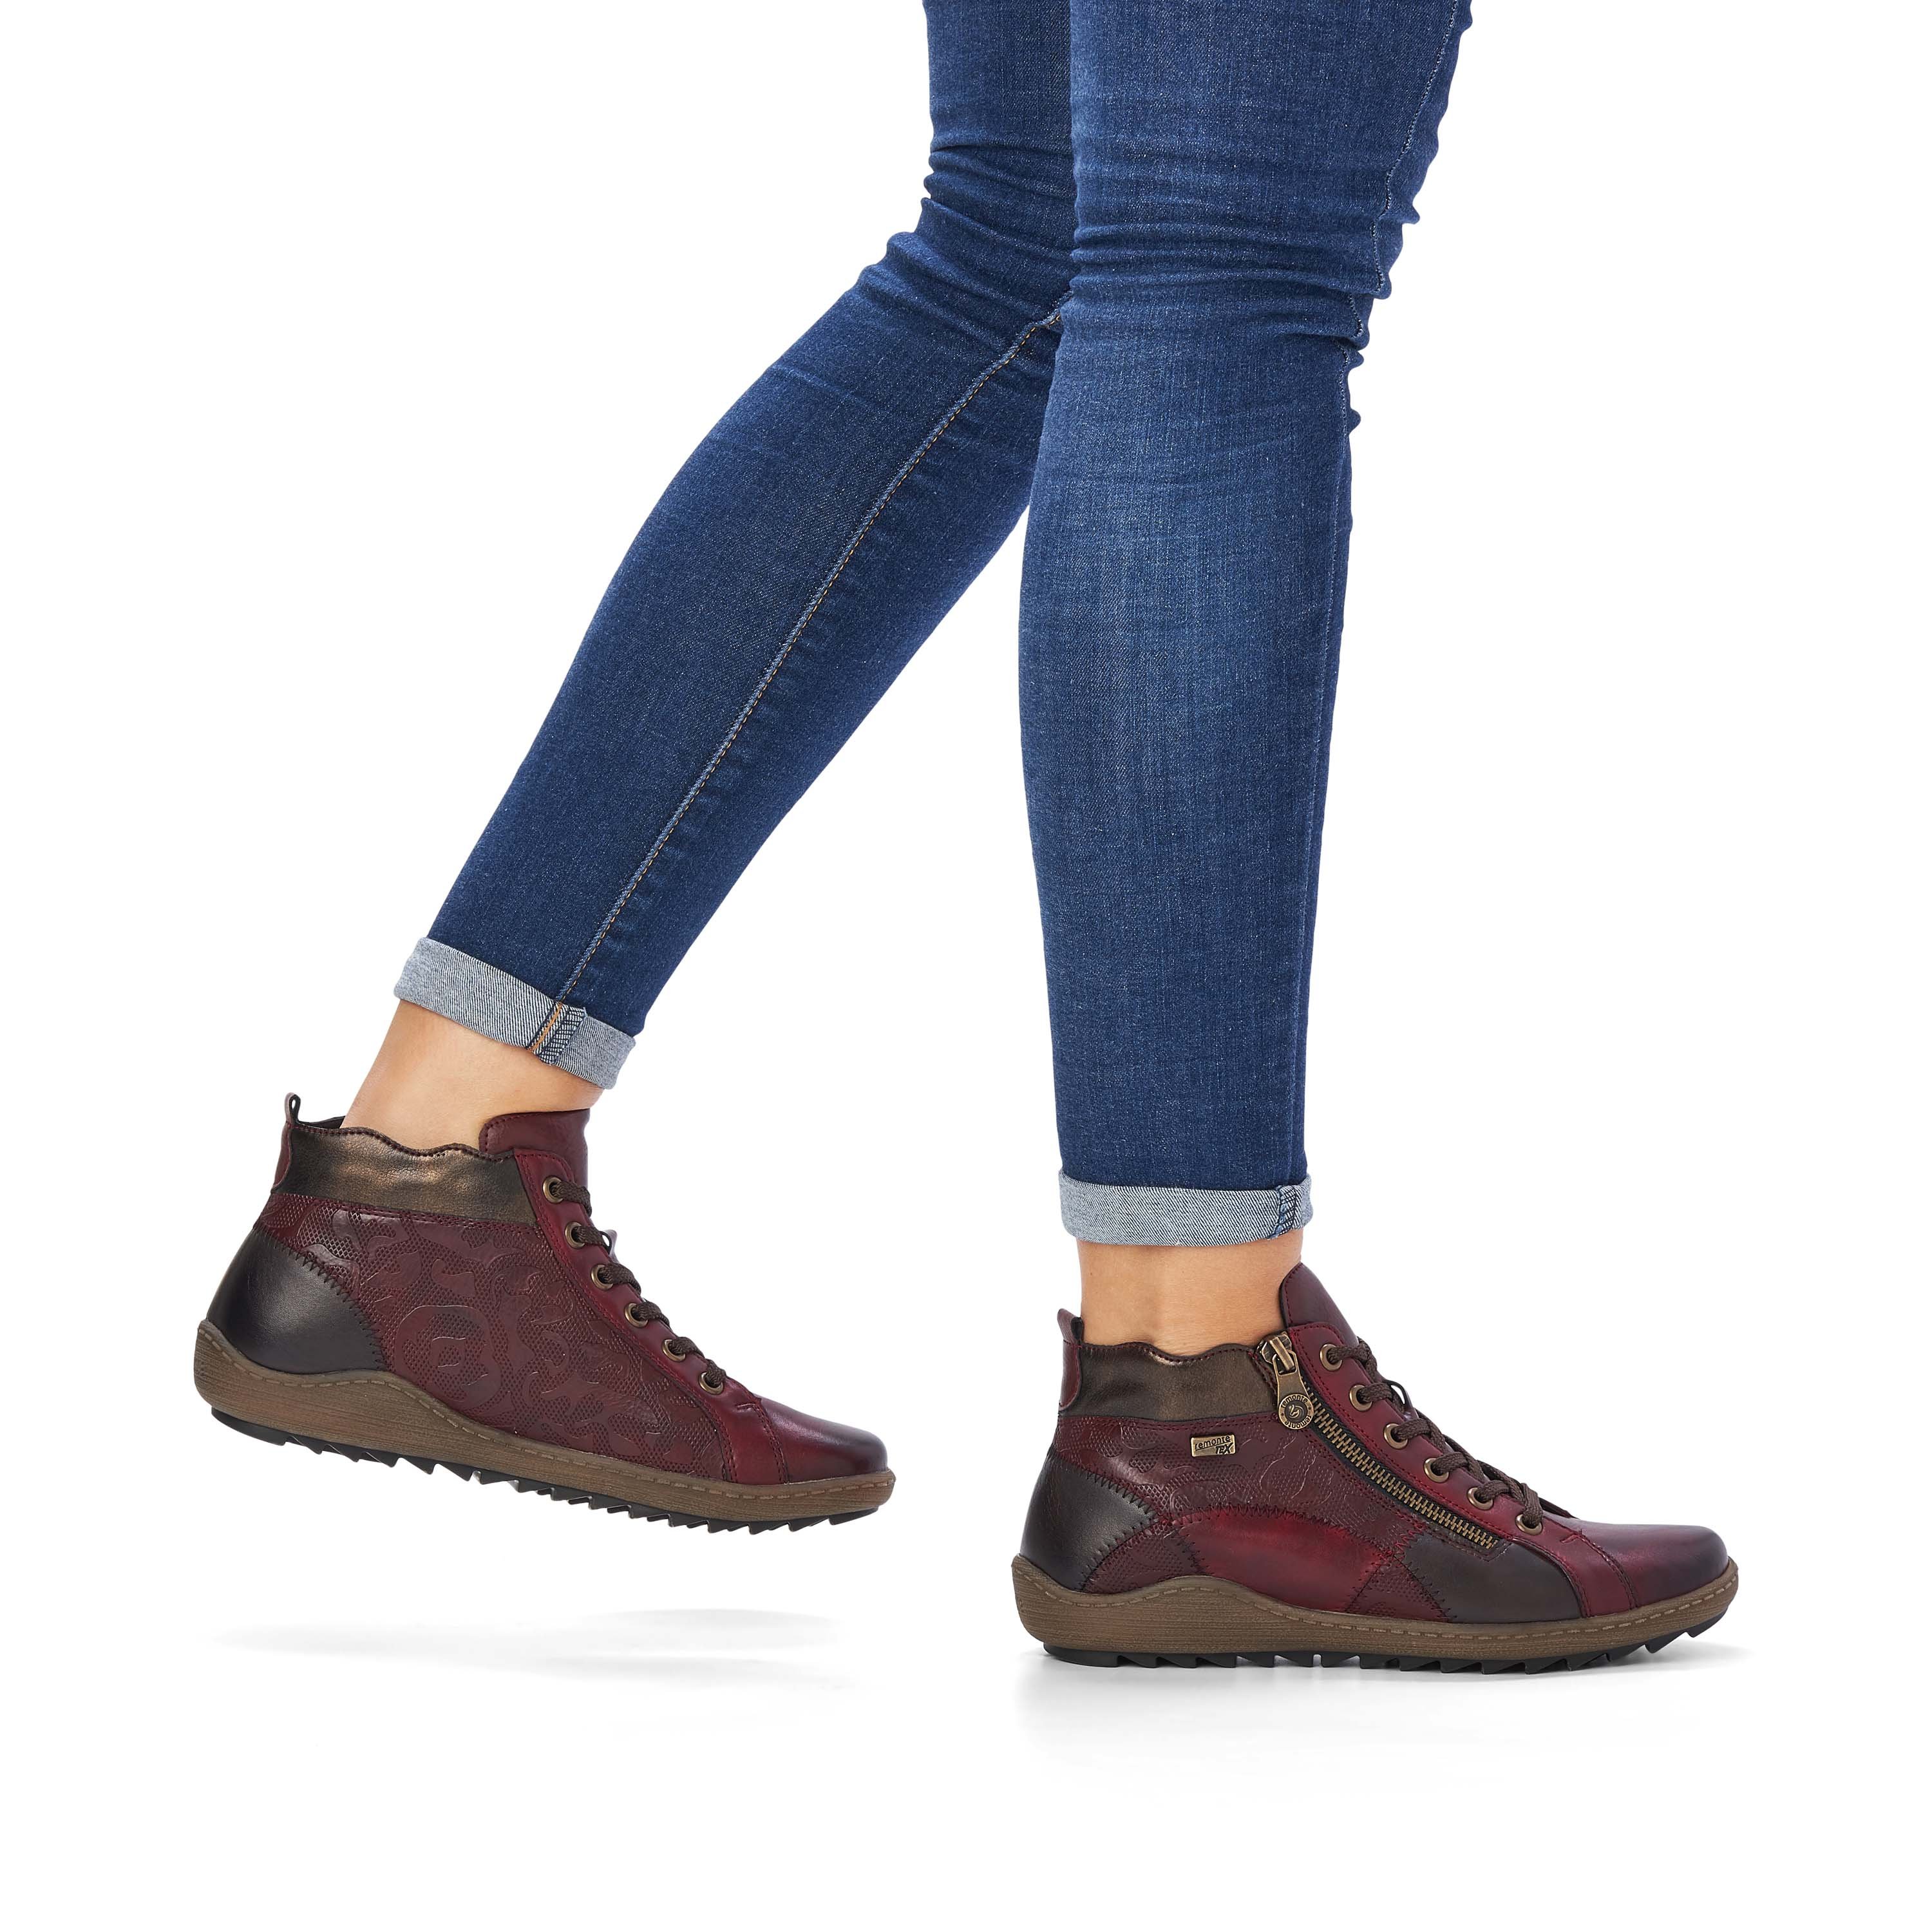 Raspberry red remonte women´s lace-up shoes R1467-35 with lacing and zipper. Shoe on foot